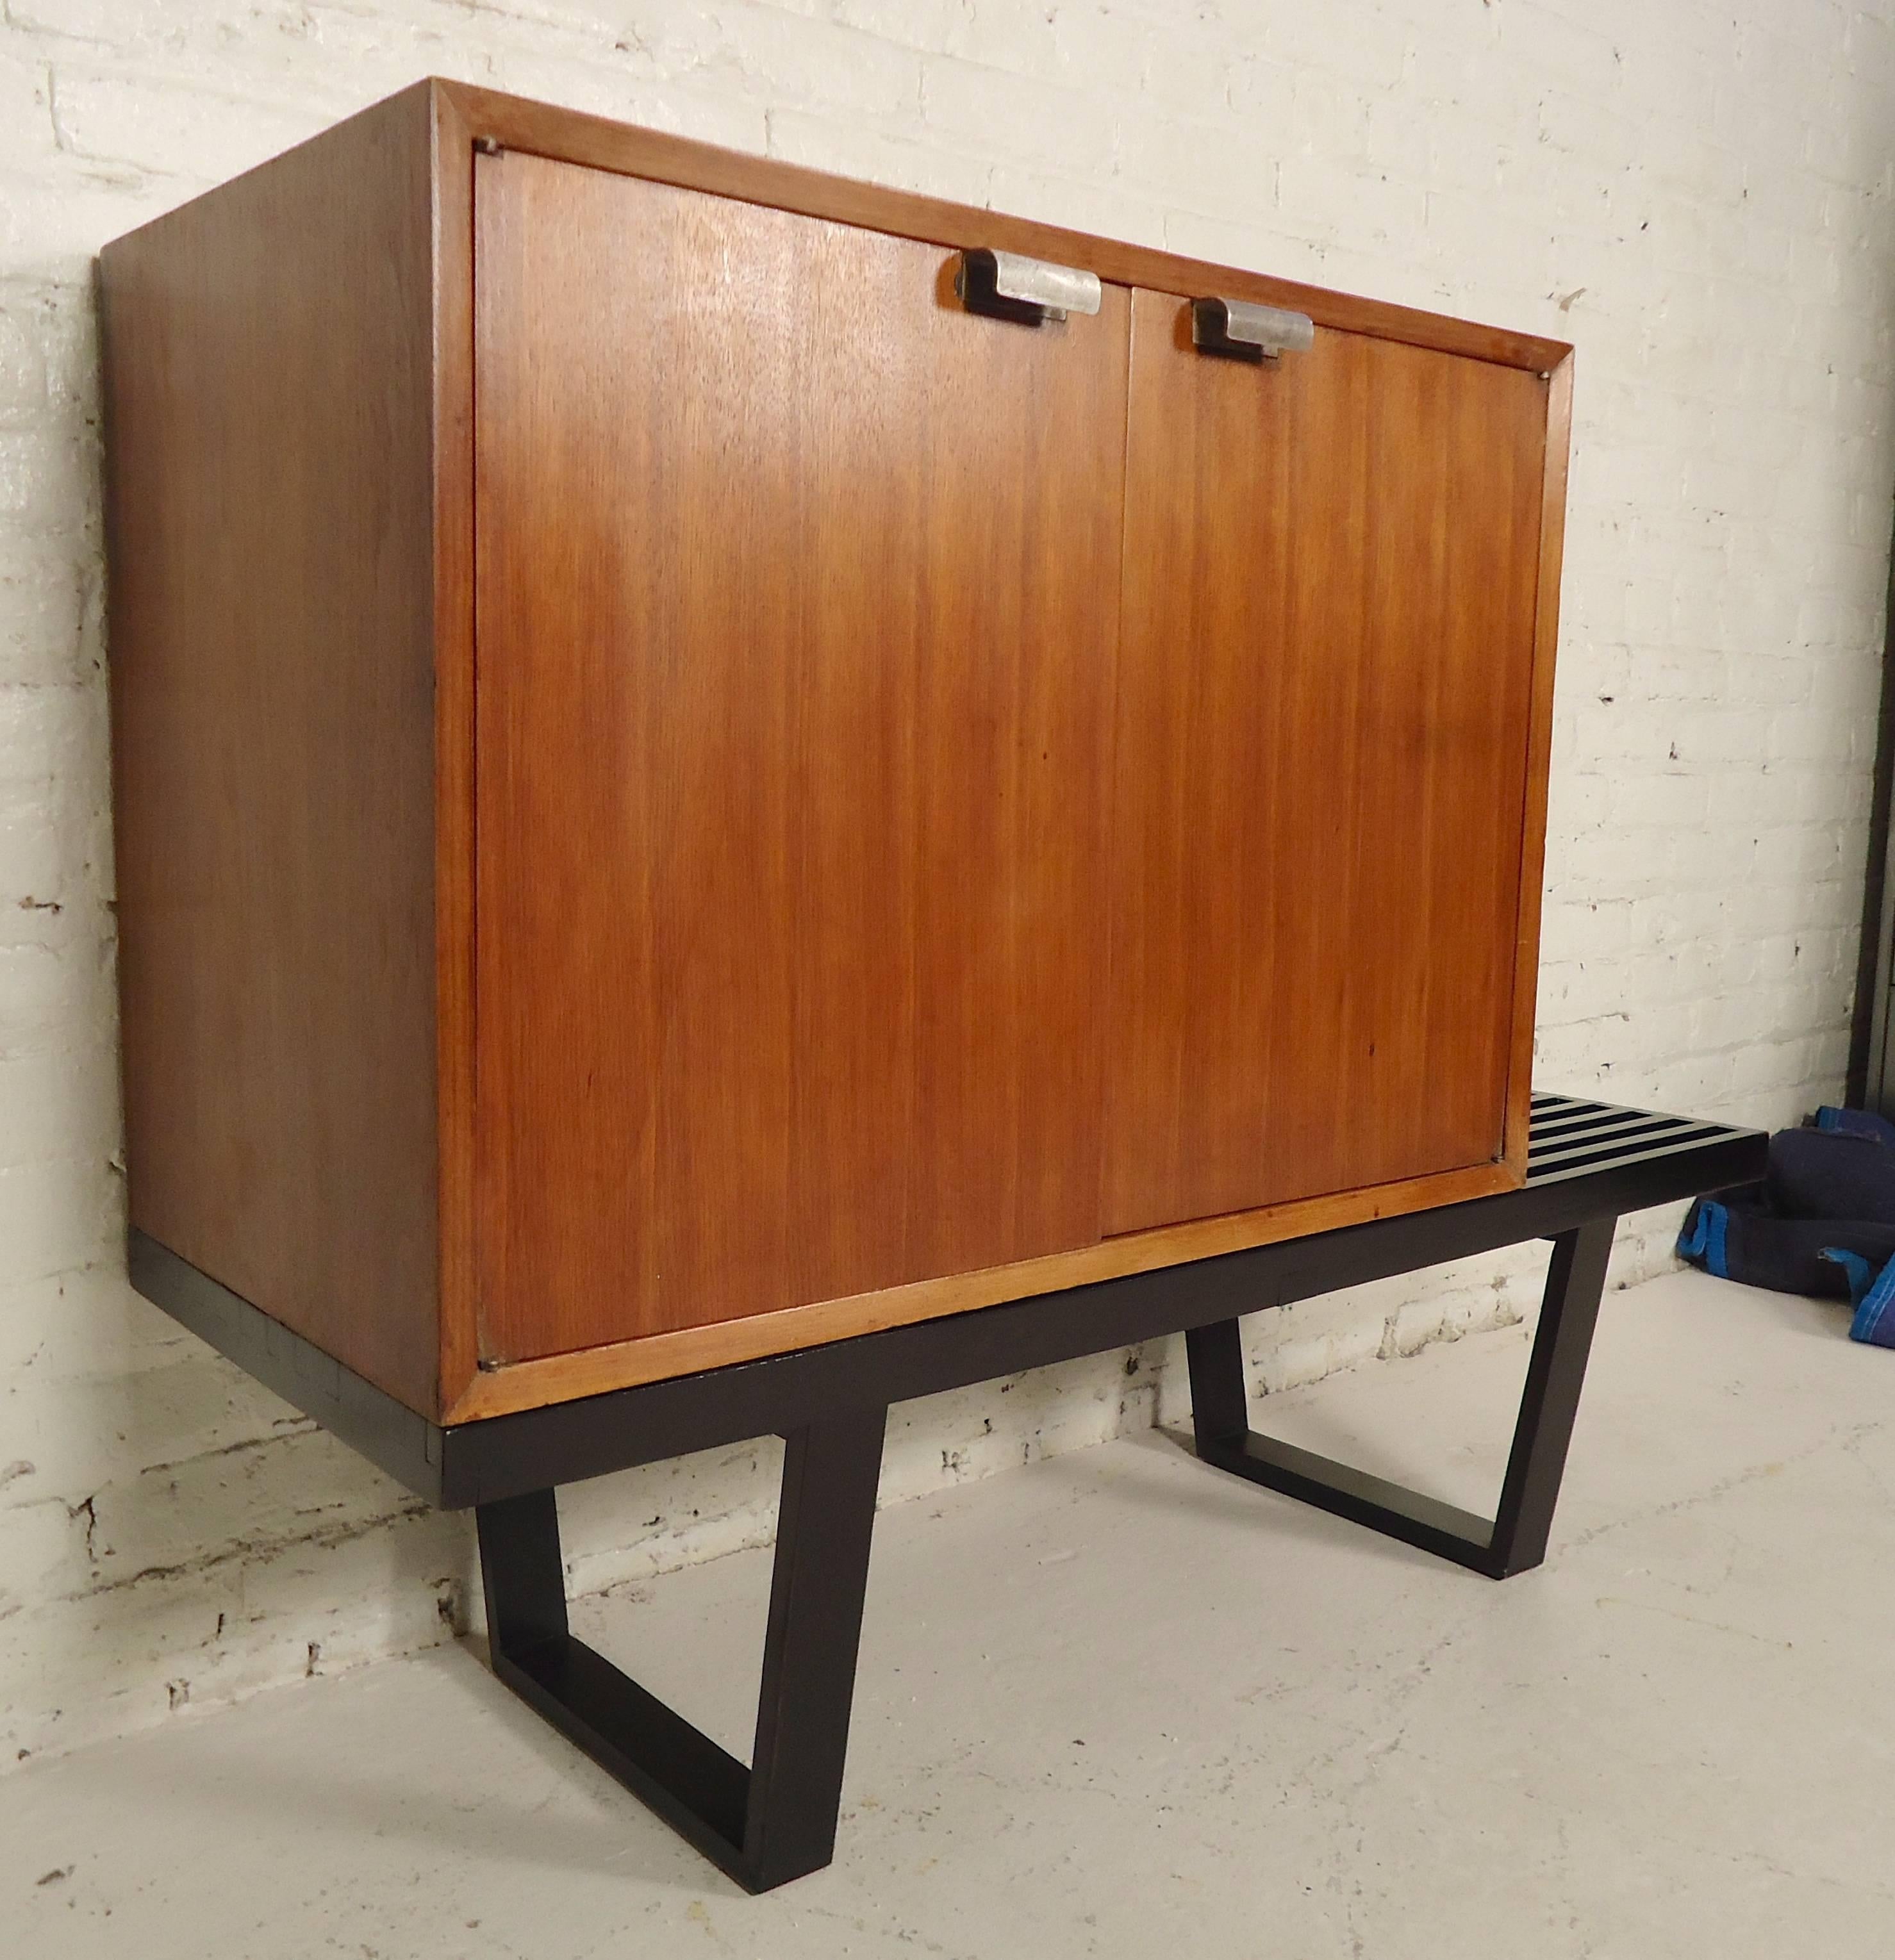 Mid-Century Modern storage cabinet set on a refinished black slat bench. Cabinet can be removed or re-positioned on bench, adjustable shelf, metal door pulls.
Cabinet: 34